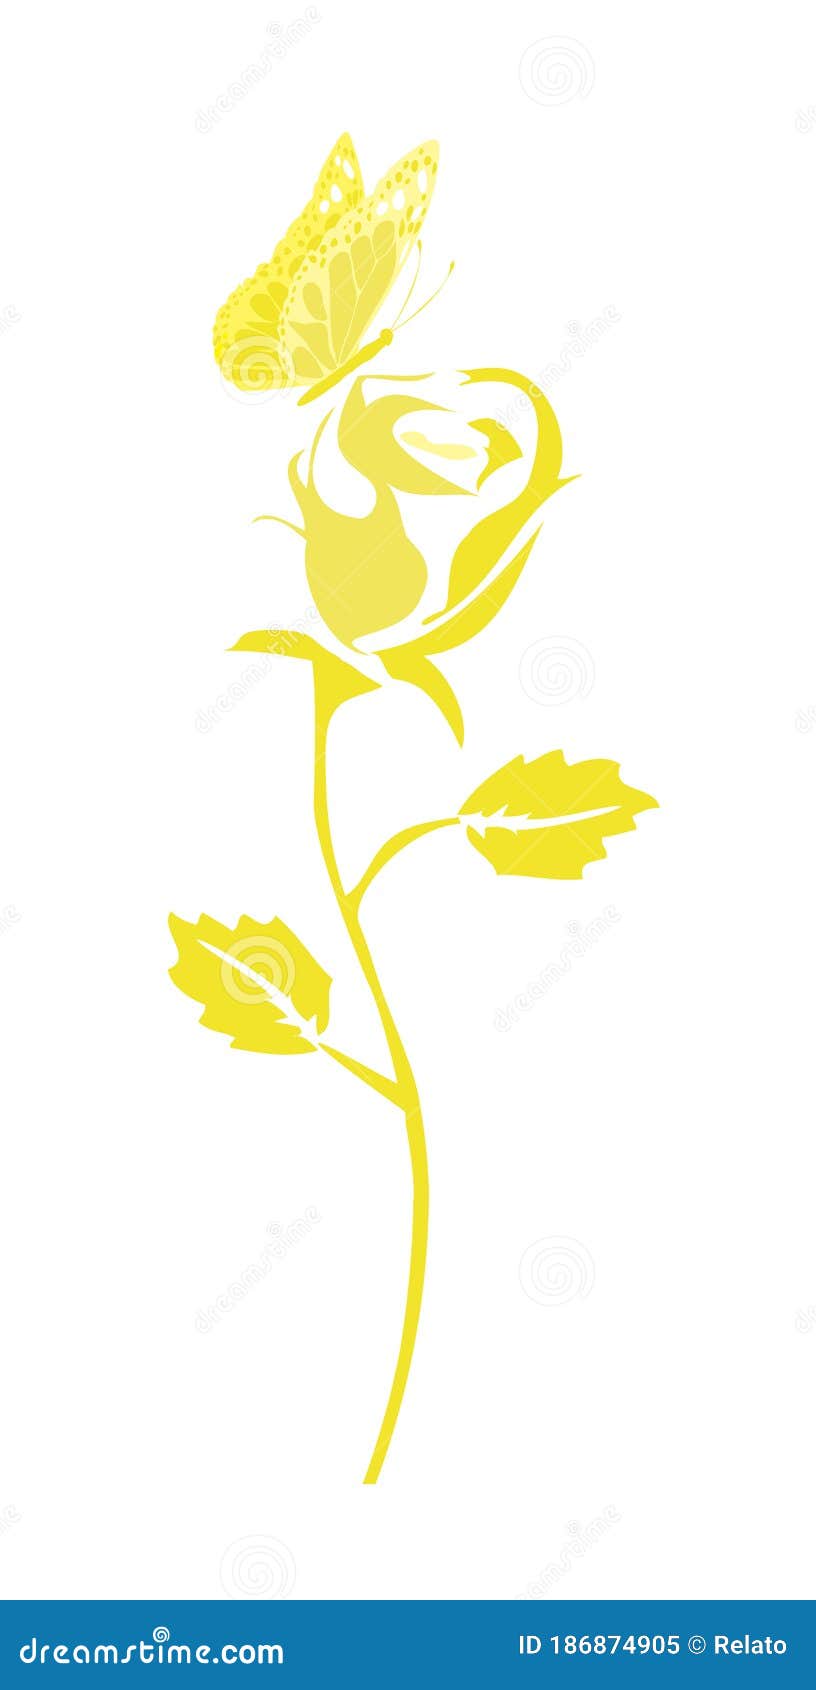 Download Vector Golden Rose And Butterfly. Stock Vector ...